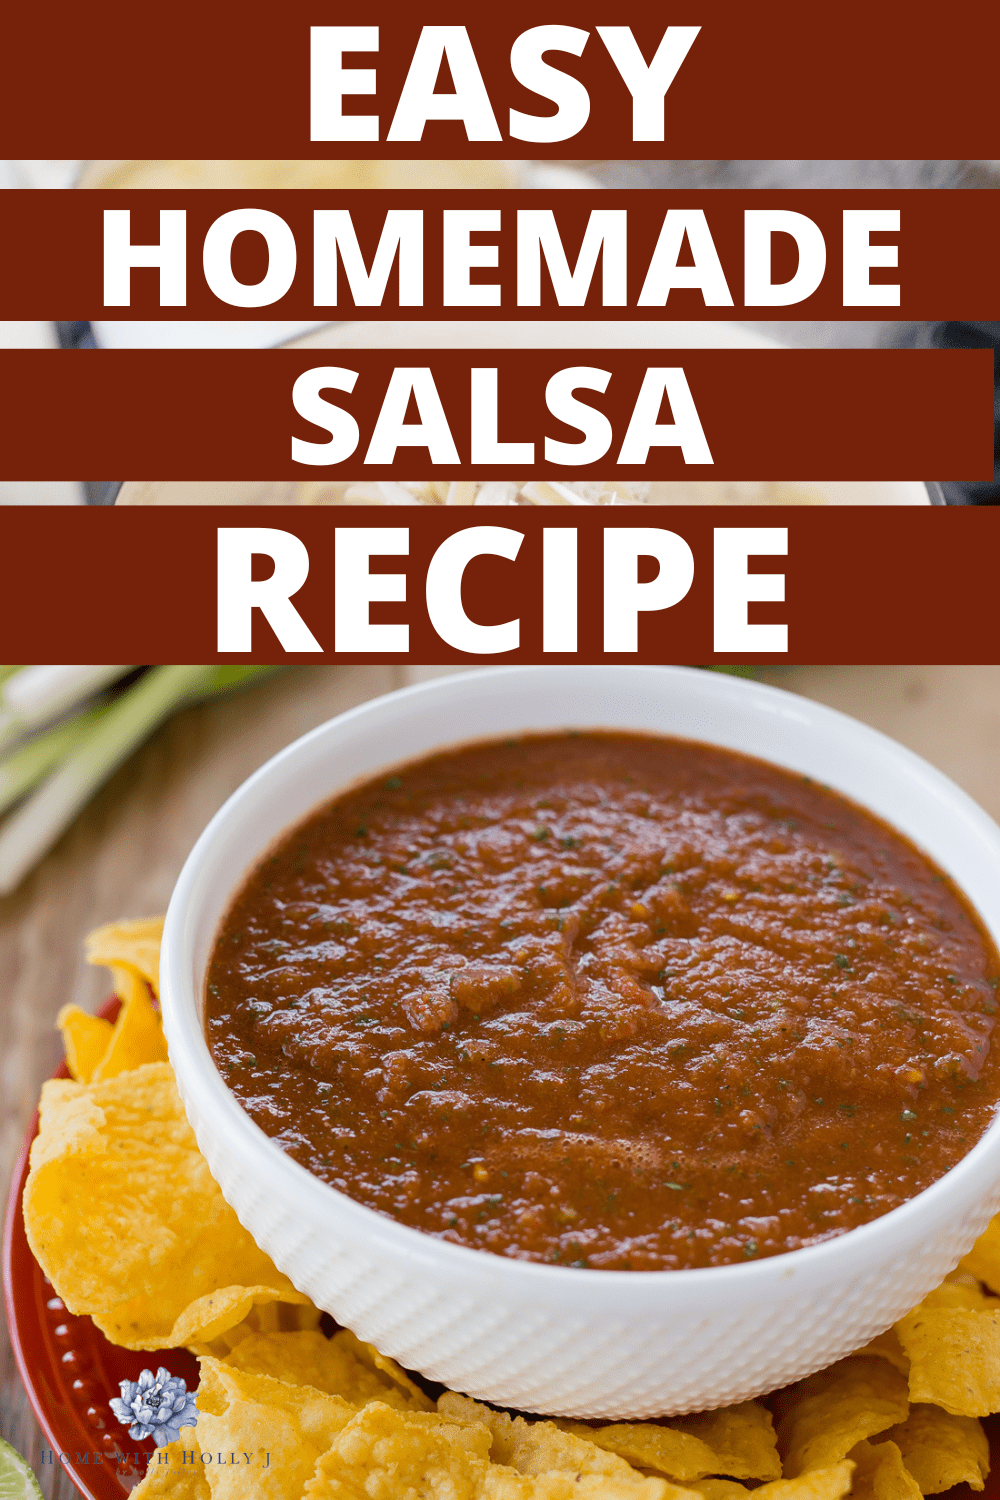 Make a delicious, crowd-pleasing salsa with only 7 simple ingredients in under 10 minutes! Get the recipe now!